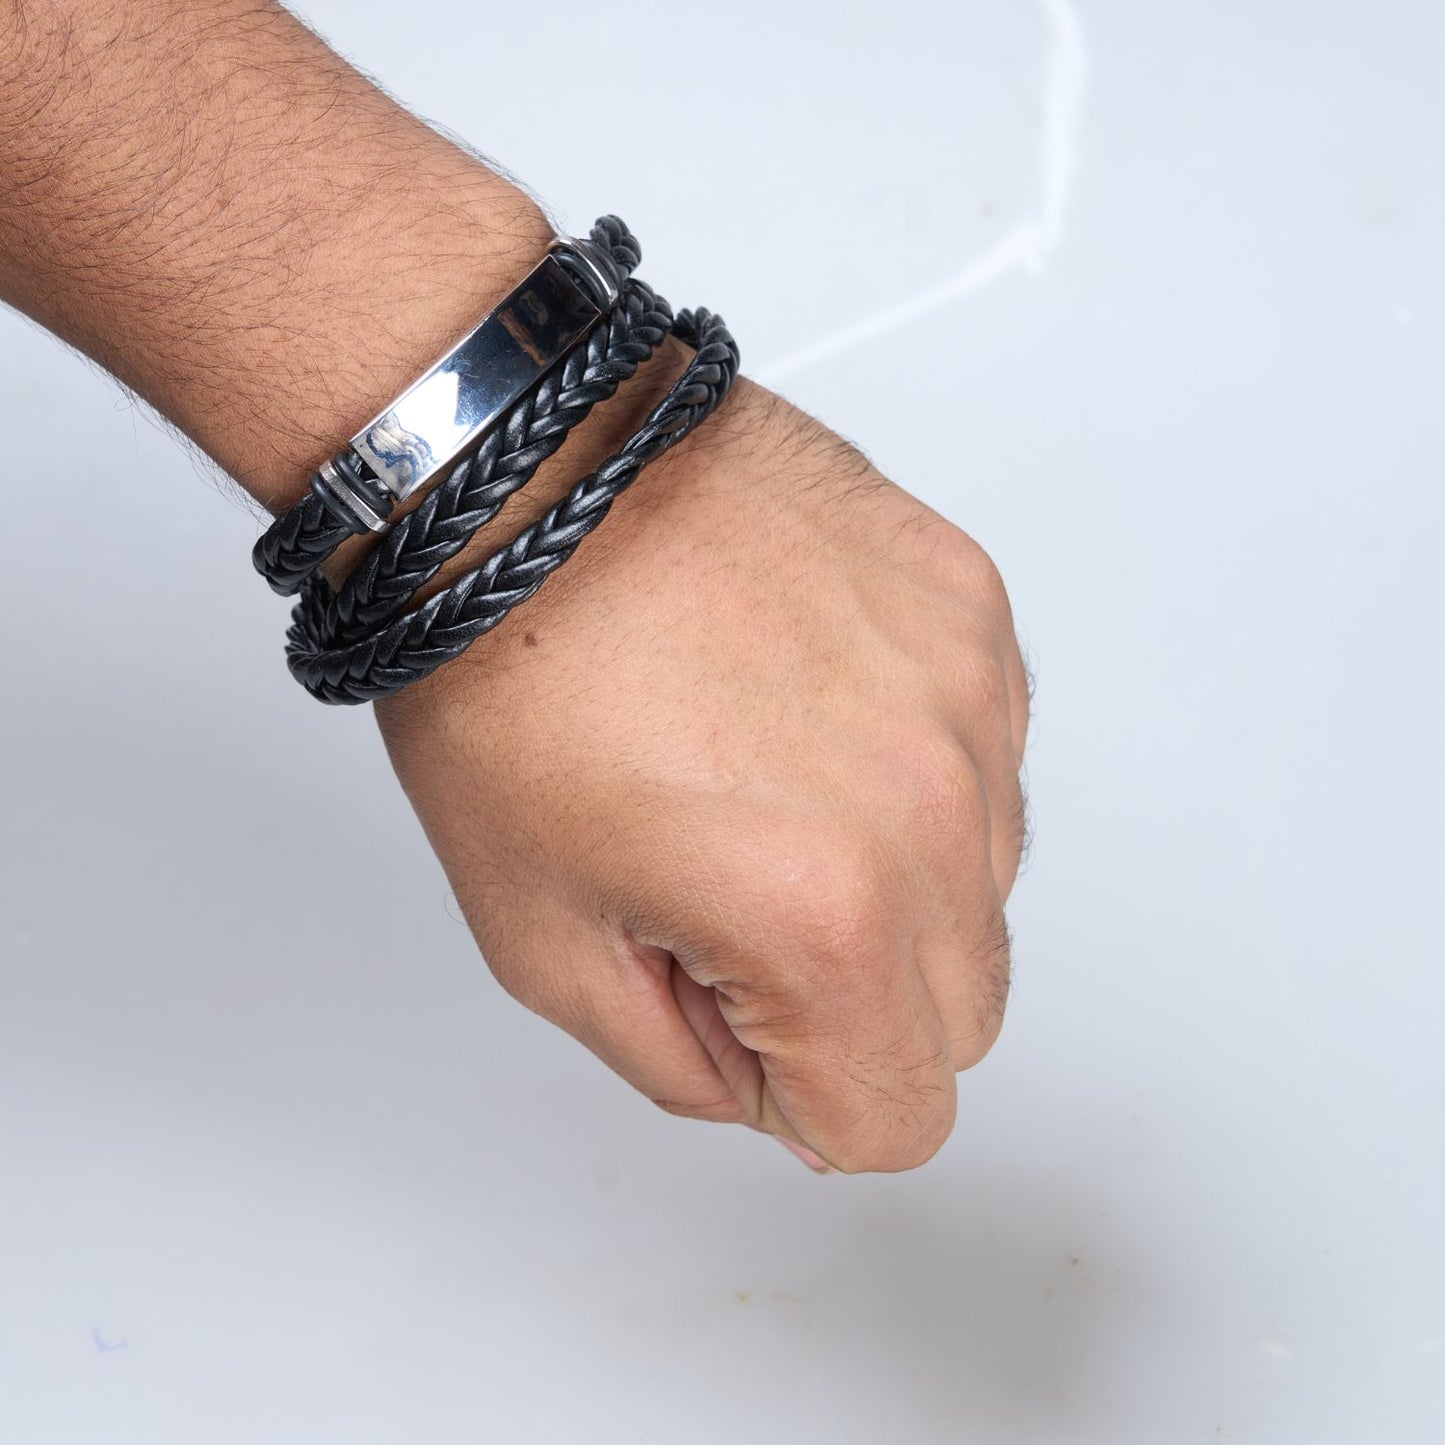 Display of Black colored long Bracelet for men, with Buckle clasp on a hand.